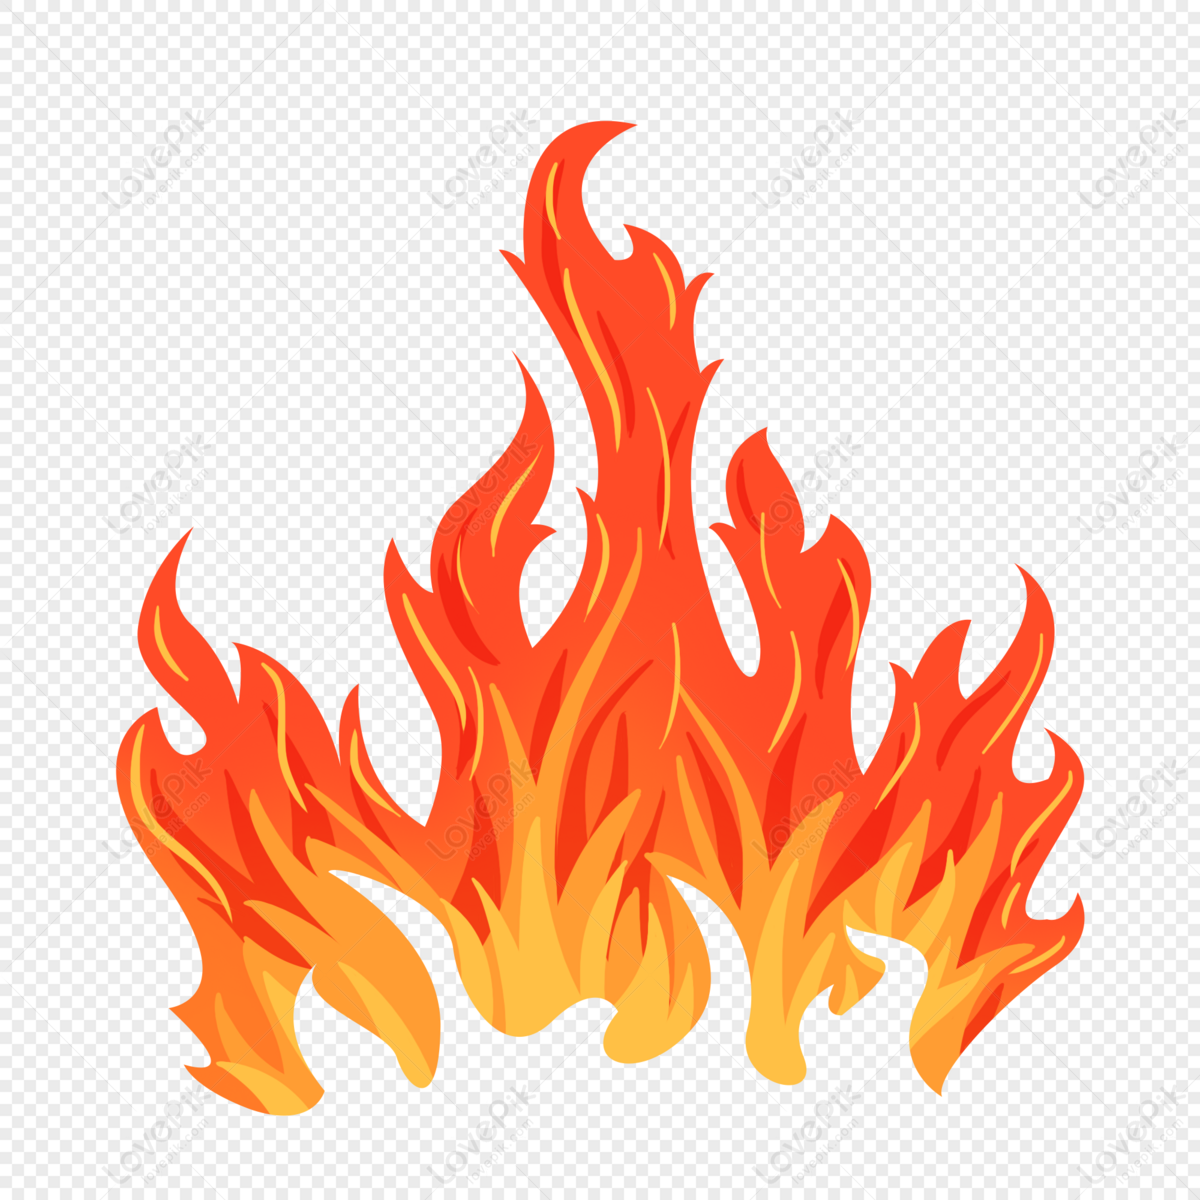 Fire Flame Icon Vector Template. Hot Red Orange Fire Flame for Caution Hot  or Spicy Food Stock Vector - Illustration of flame, background: 105848431